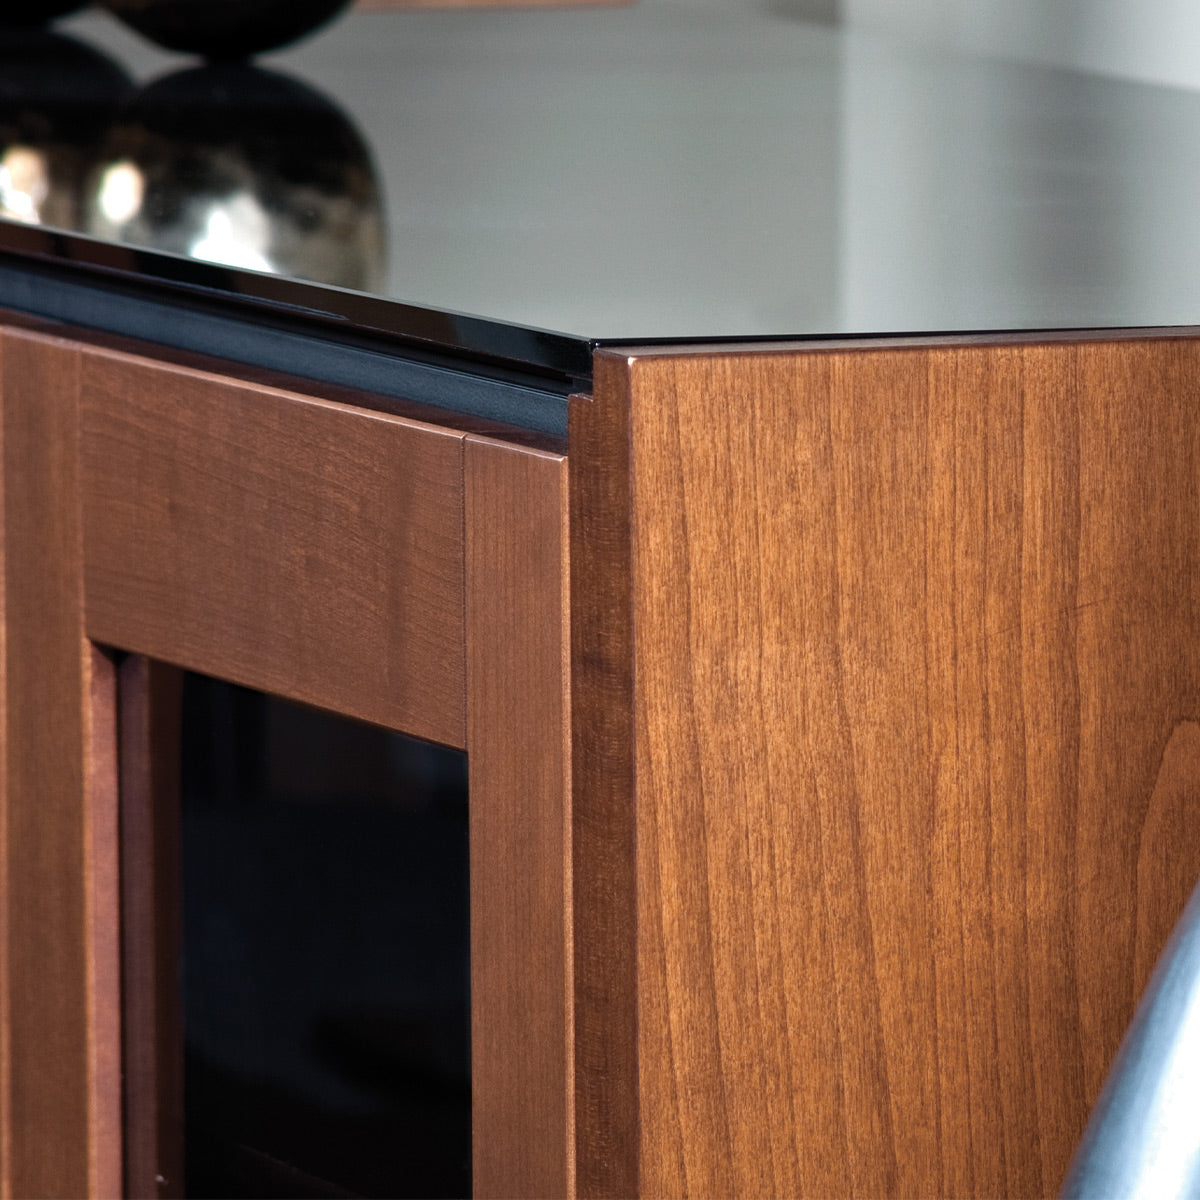 Salamander Chameleon Collection Corsica 336 Triple Speaker Integrated Cabinet (Thick Cherry with Black Glass Top)